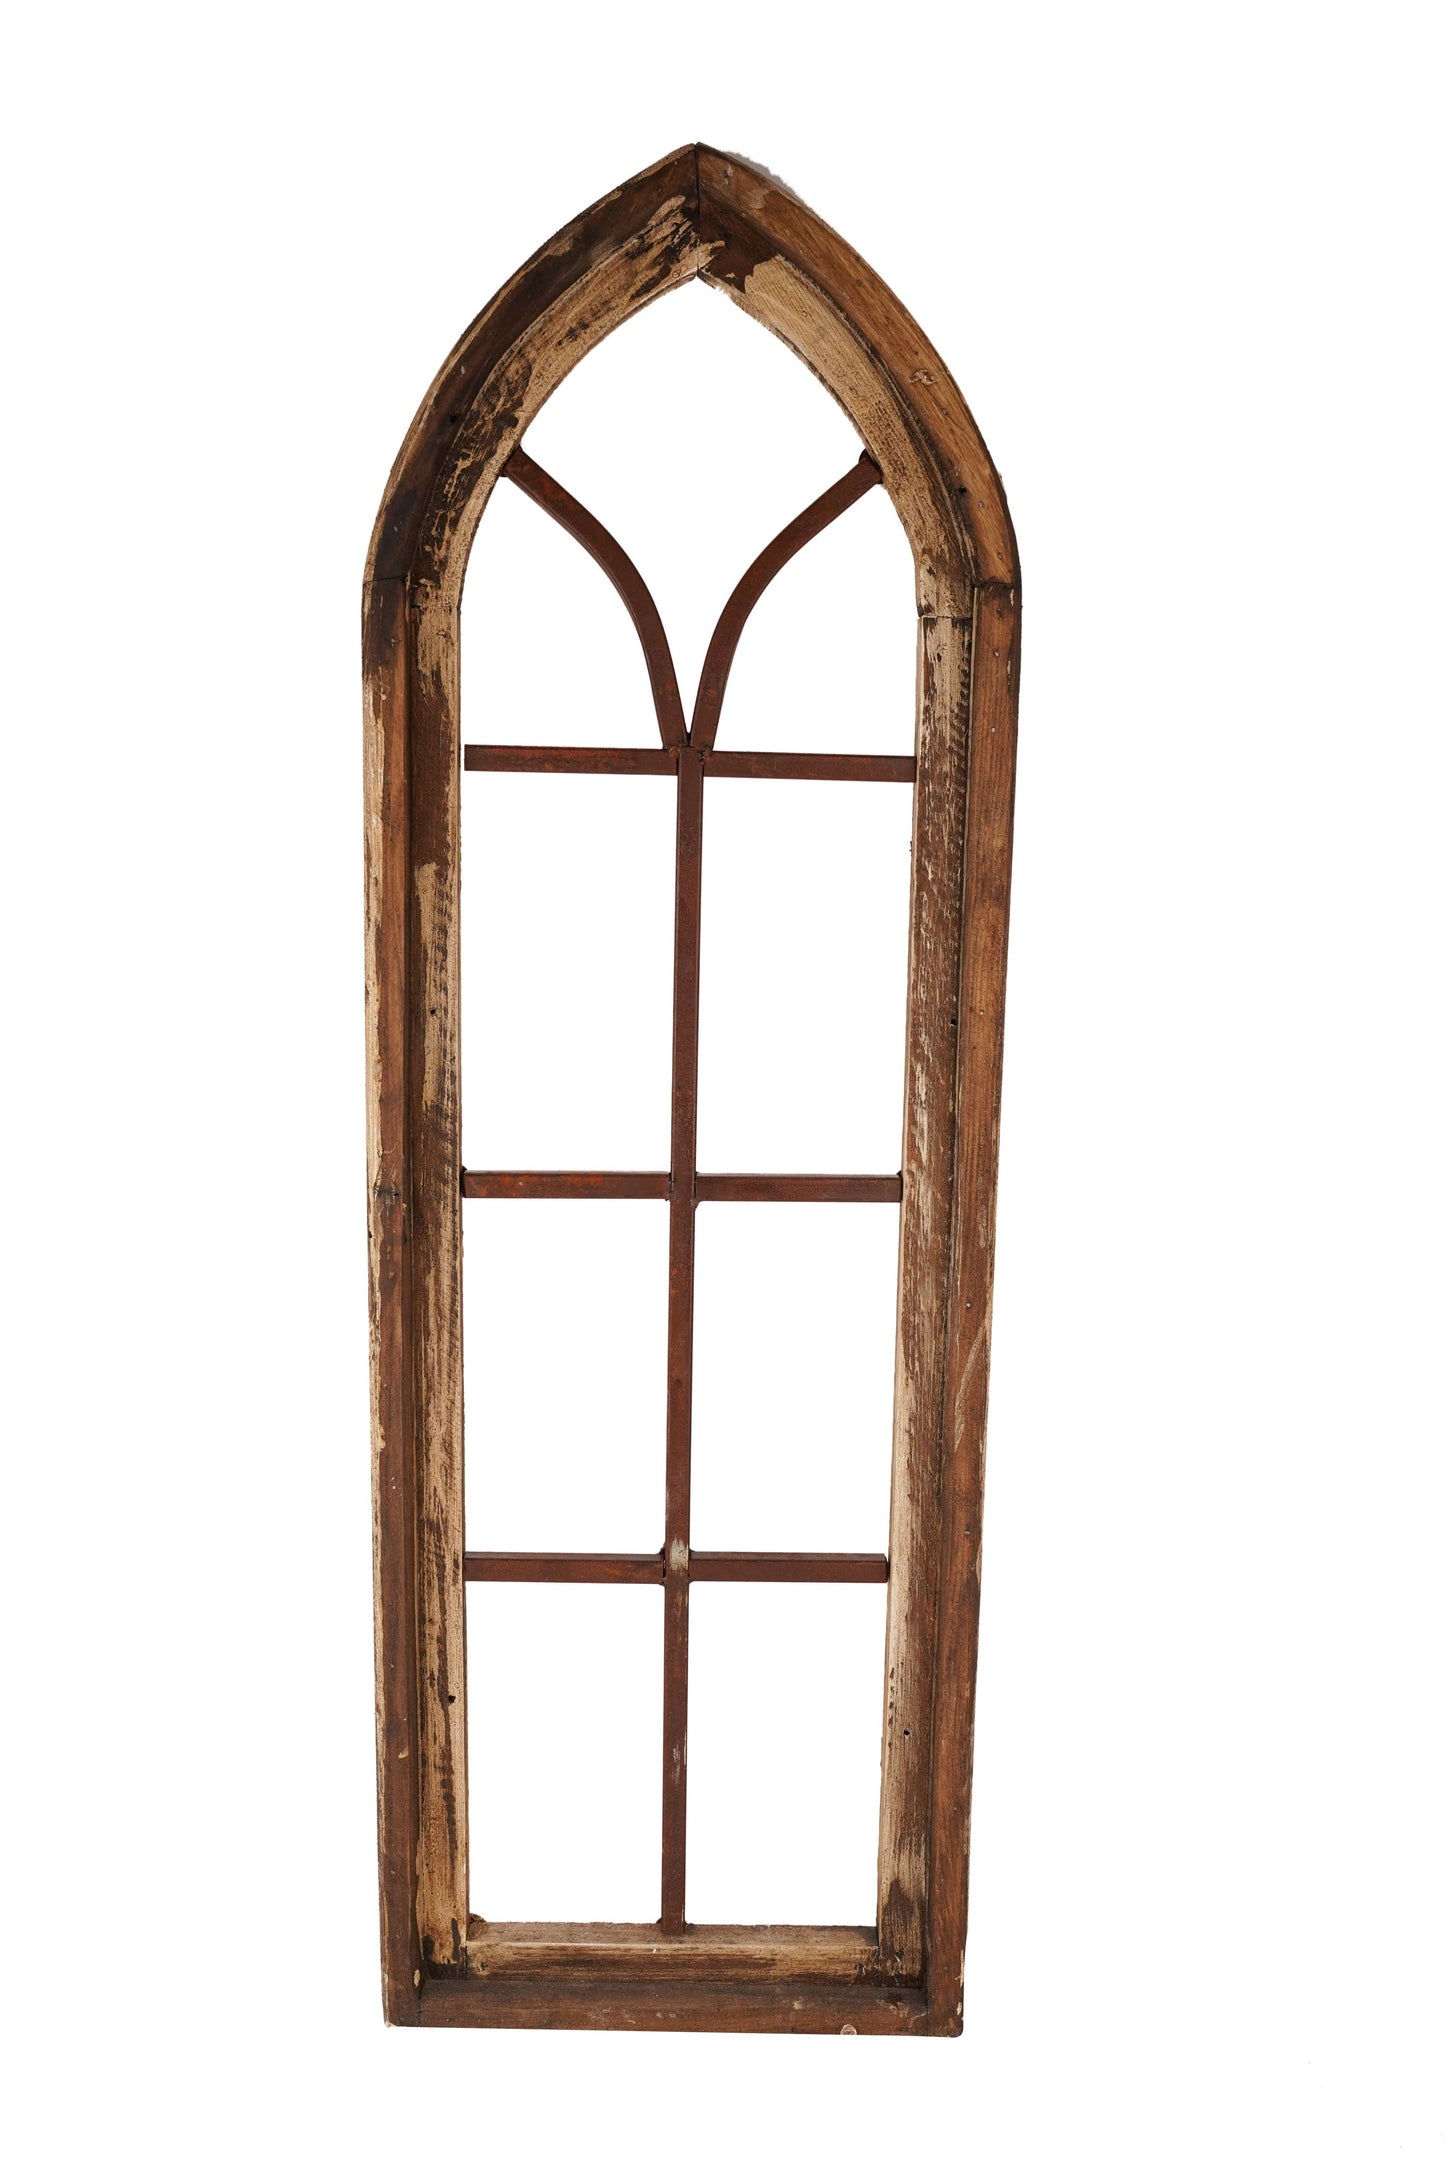 Kingston Wall Decor Window-12x36 inches-Antiqued White-SALE - Paisley Grace Makery